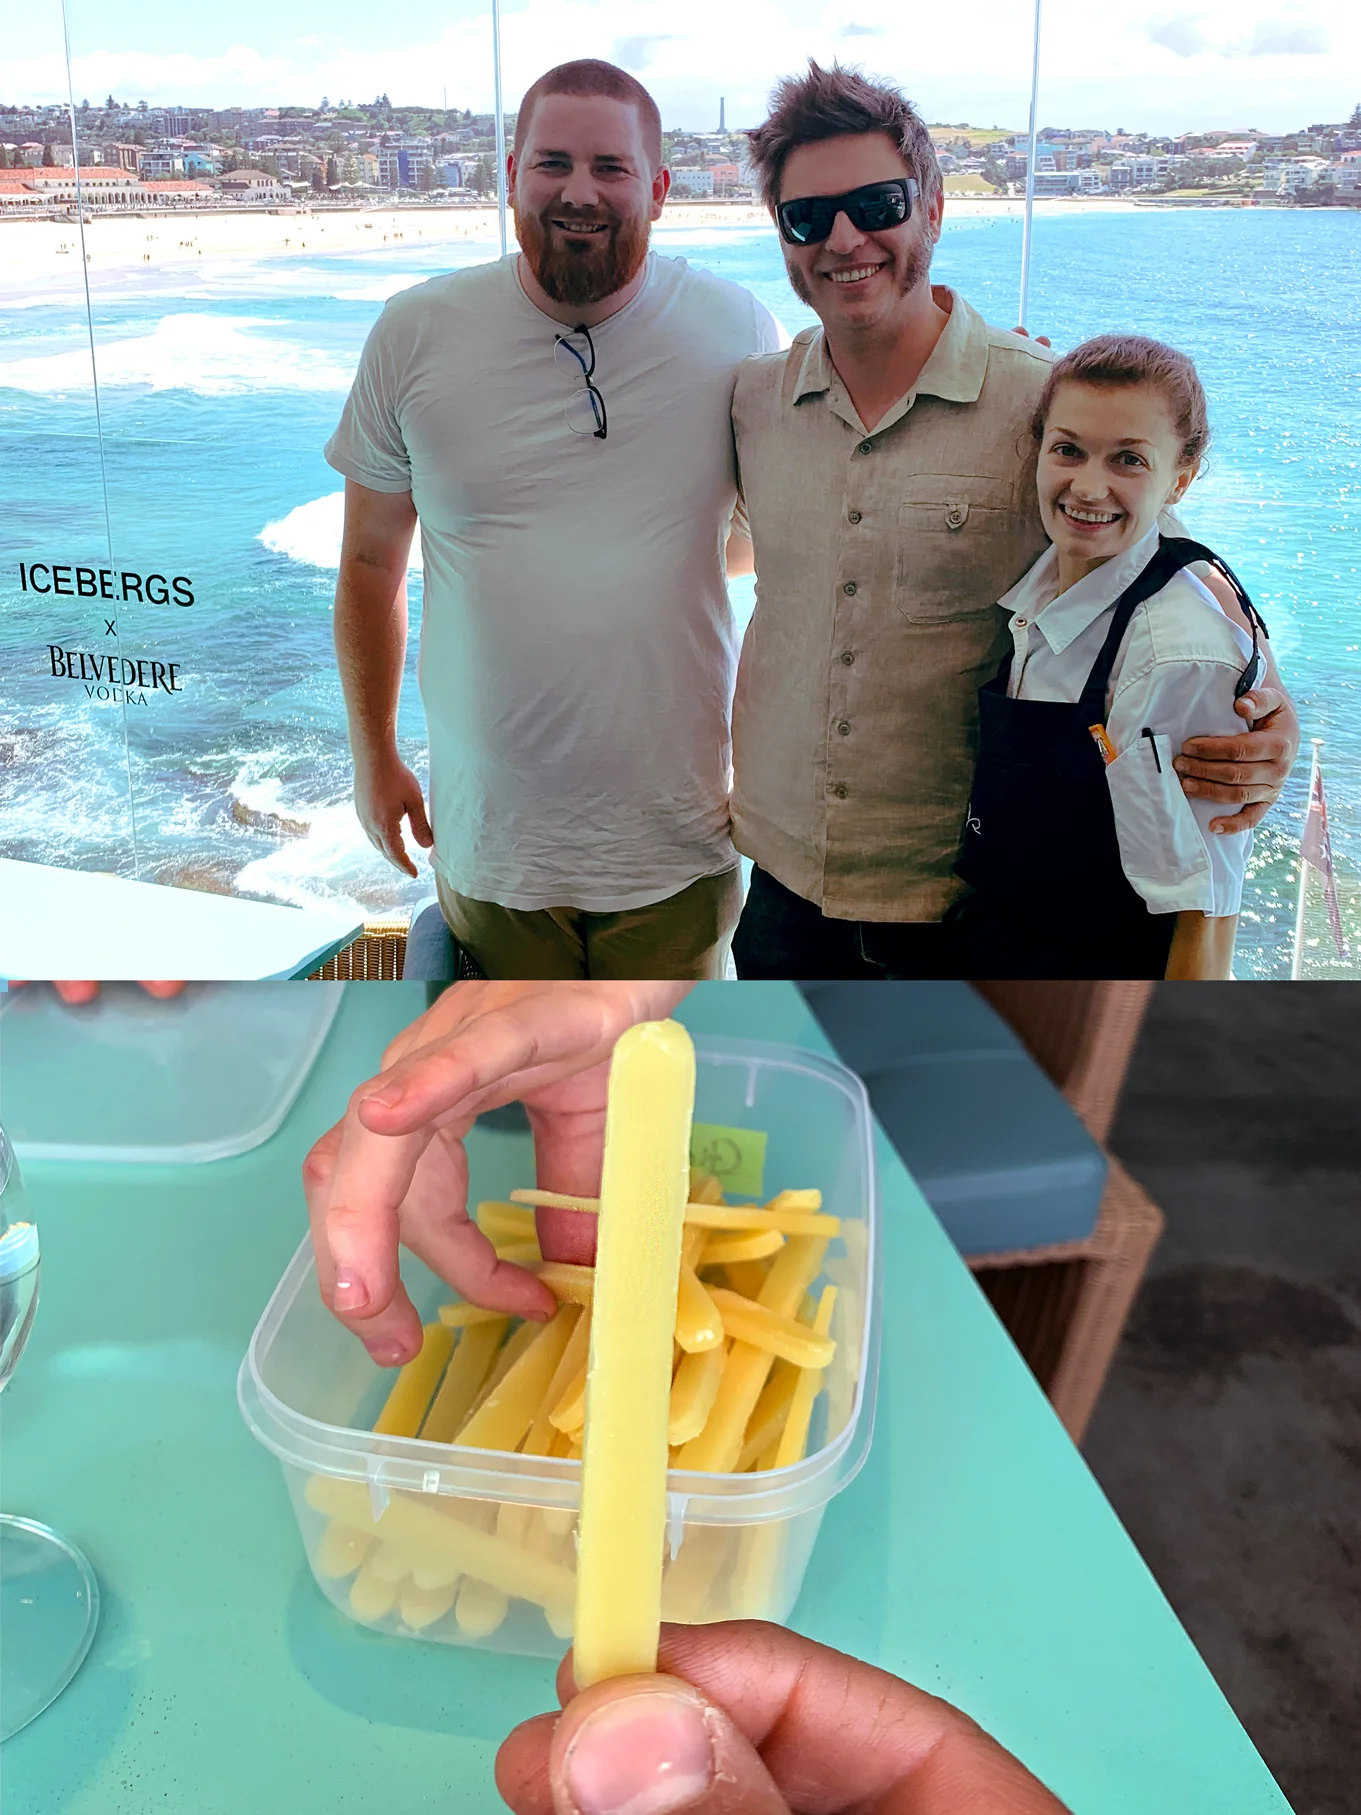 Brittany and Alex with Tim Malfroy and his wares at Icebergs, Bondi